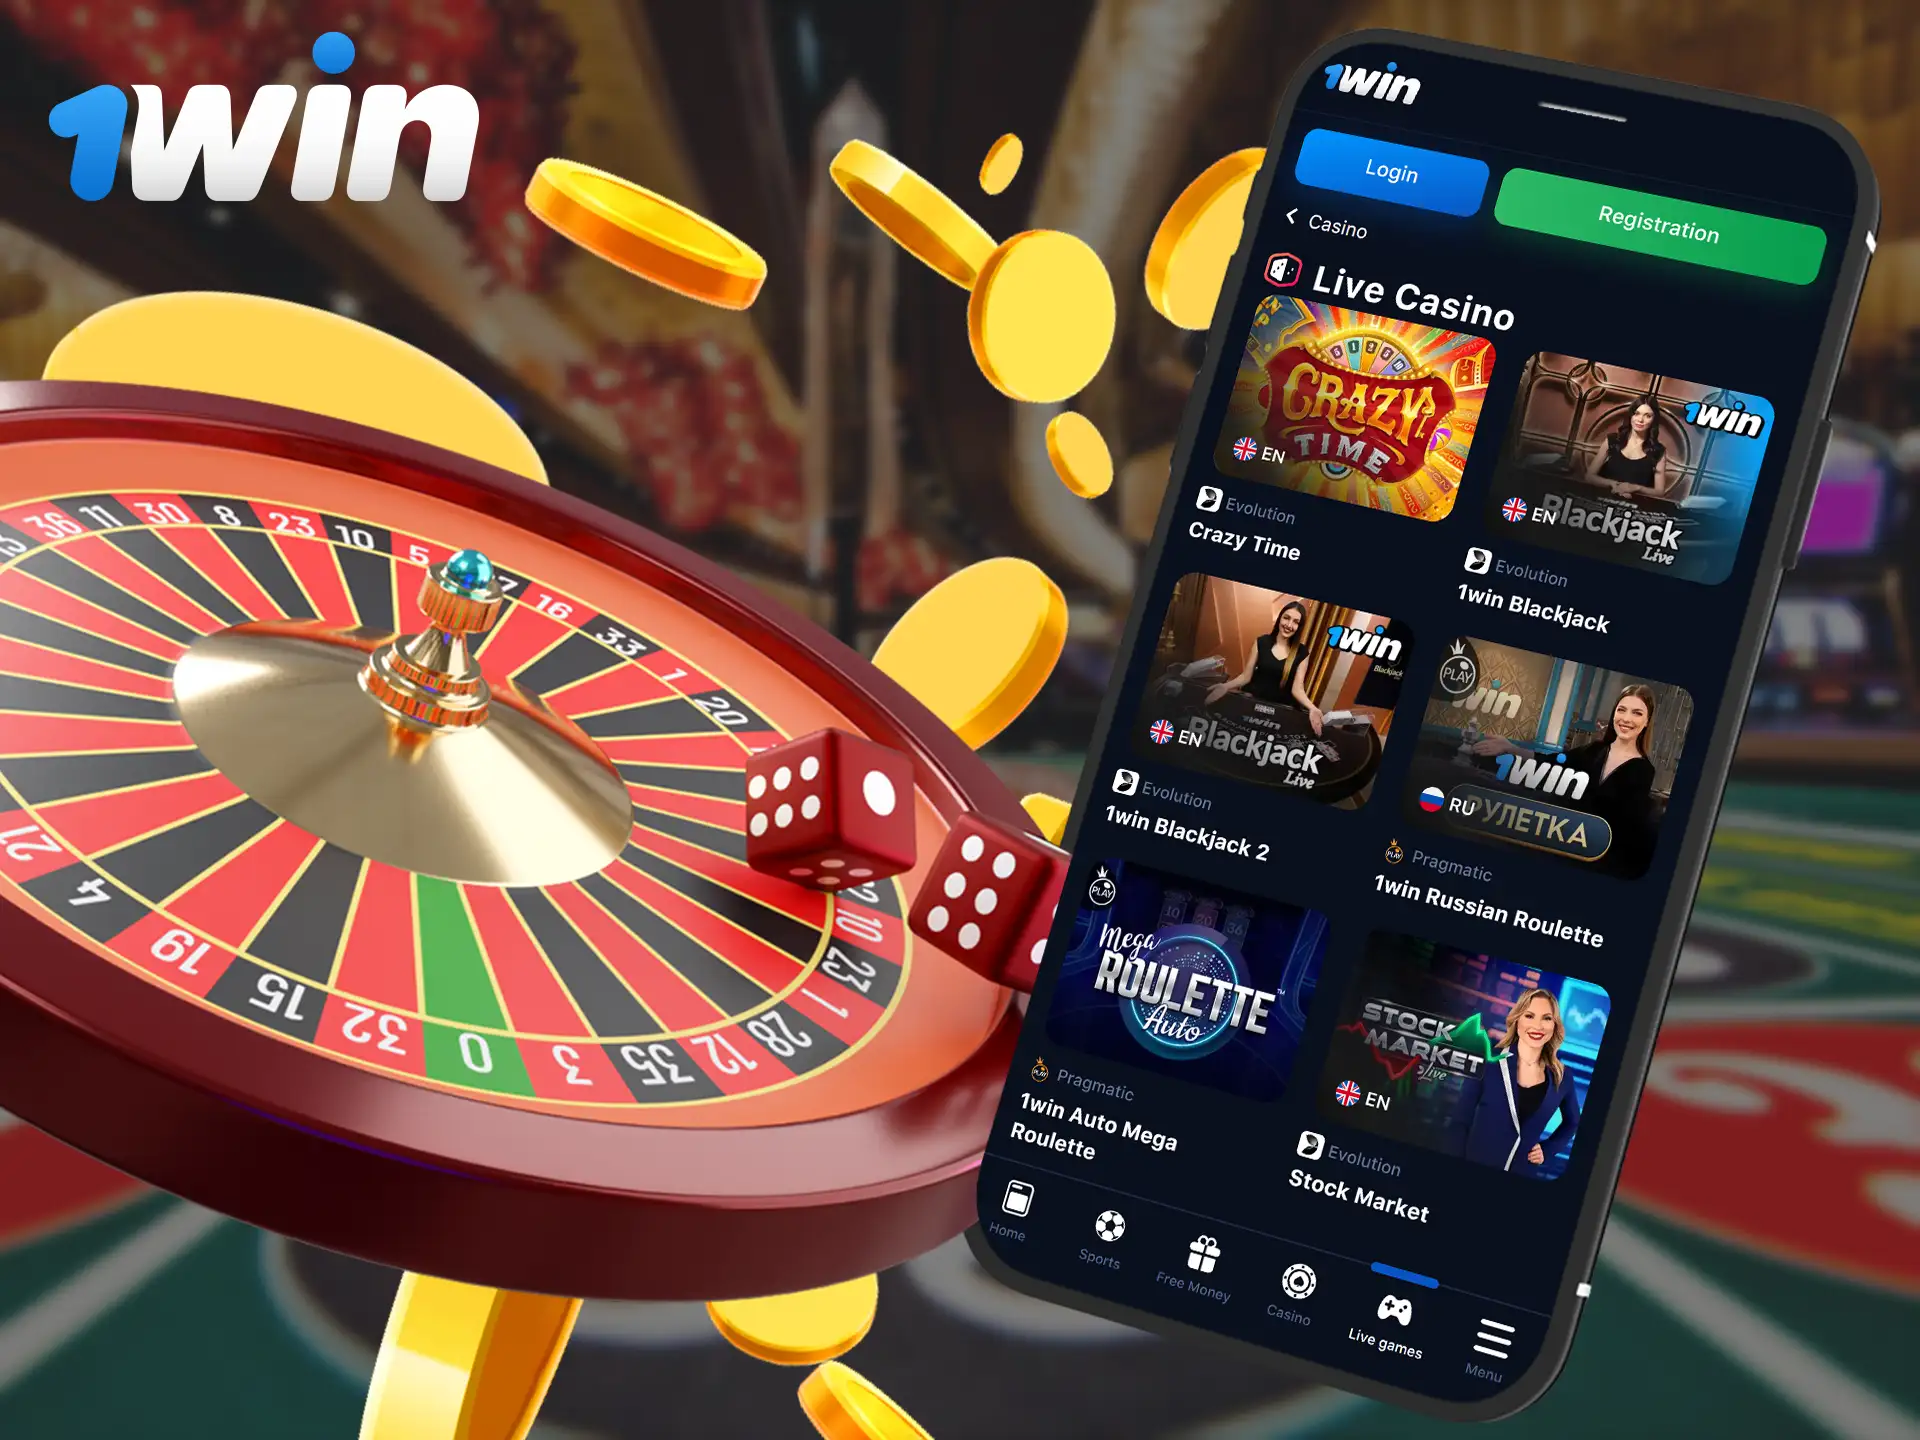 The 1Win mobile app offers virtual versions of popular game shows, allowing viewers to participate in real time.